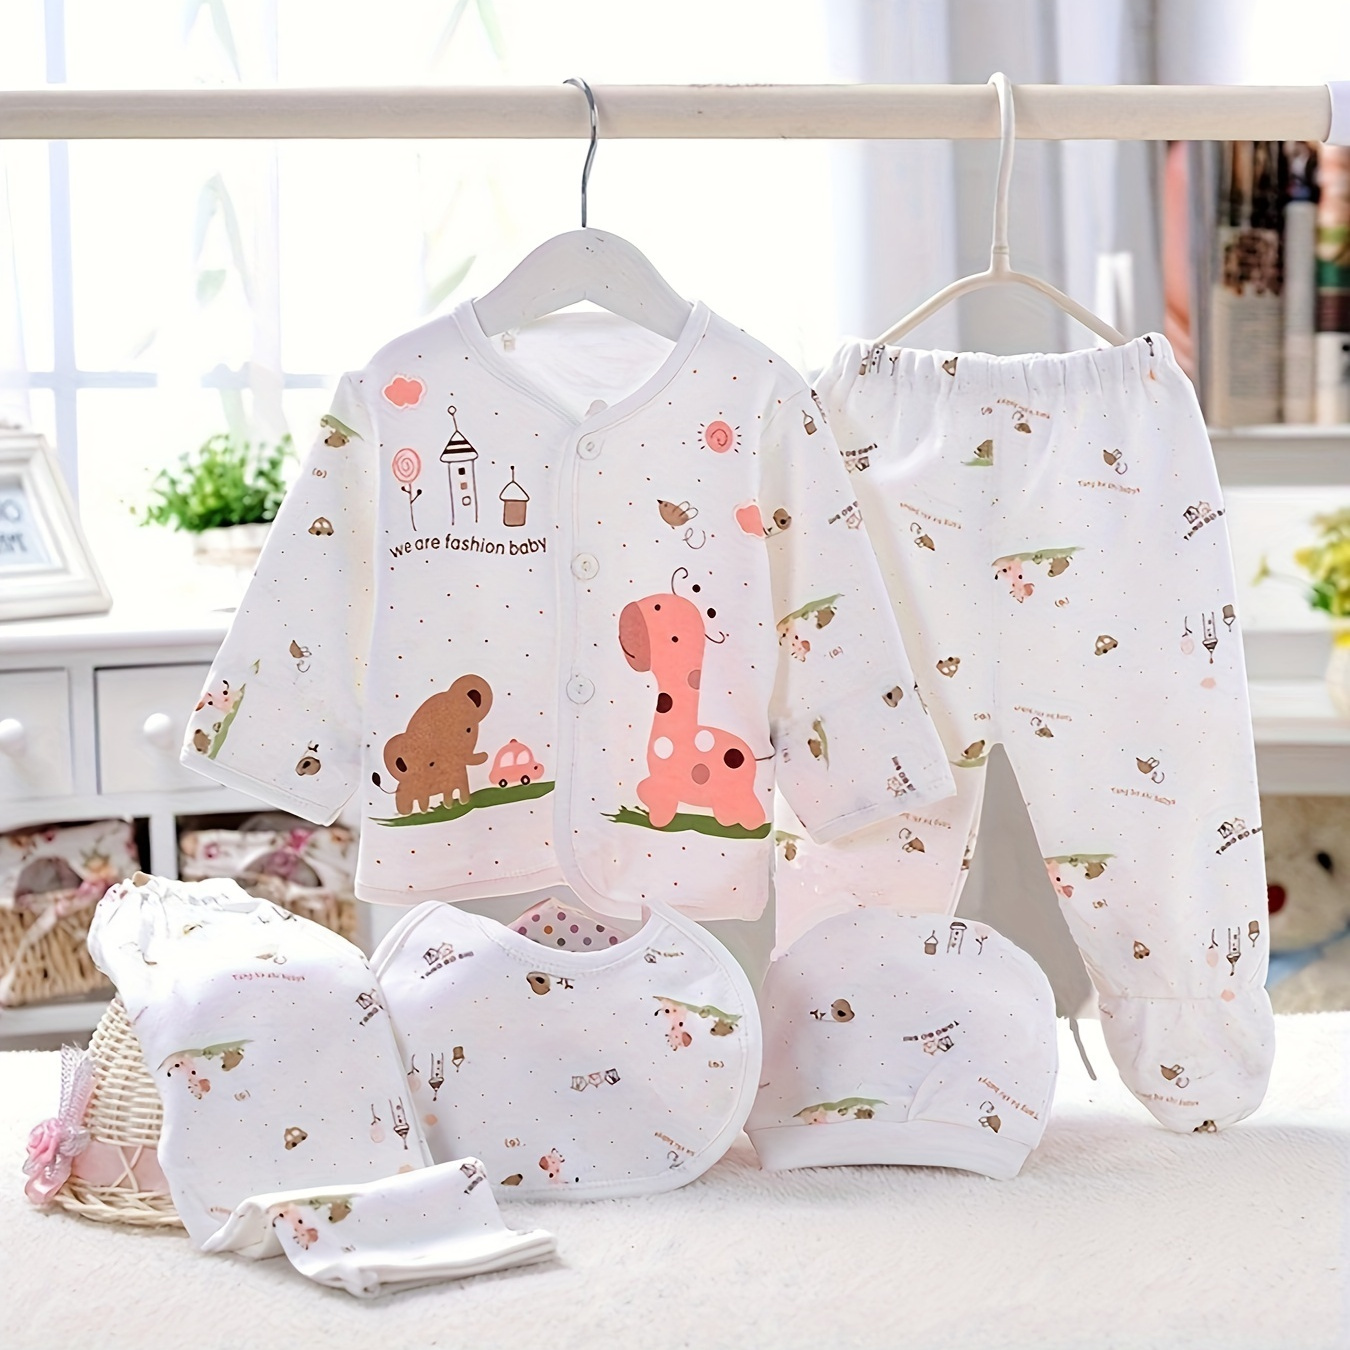 

Newborn Baby 5pcs Outfit Pregnancy Gifts - Cardigan Top Trousers Bib Hat Set Cute Cartoon & Cotton Soft Comfy Baby Supplies